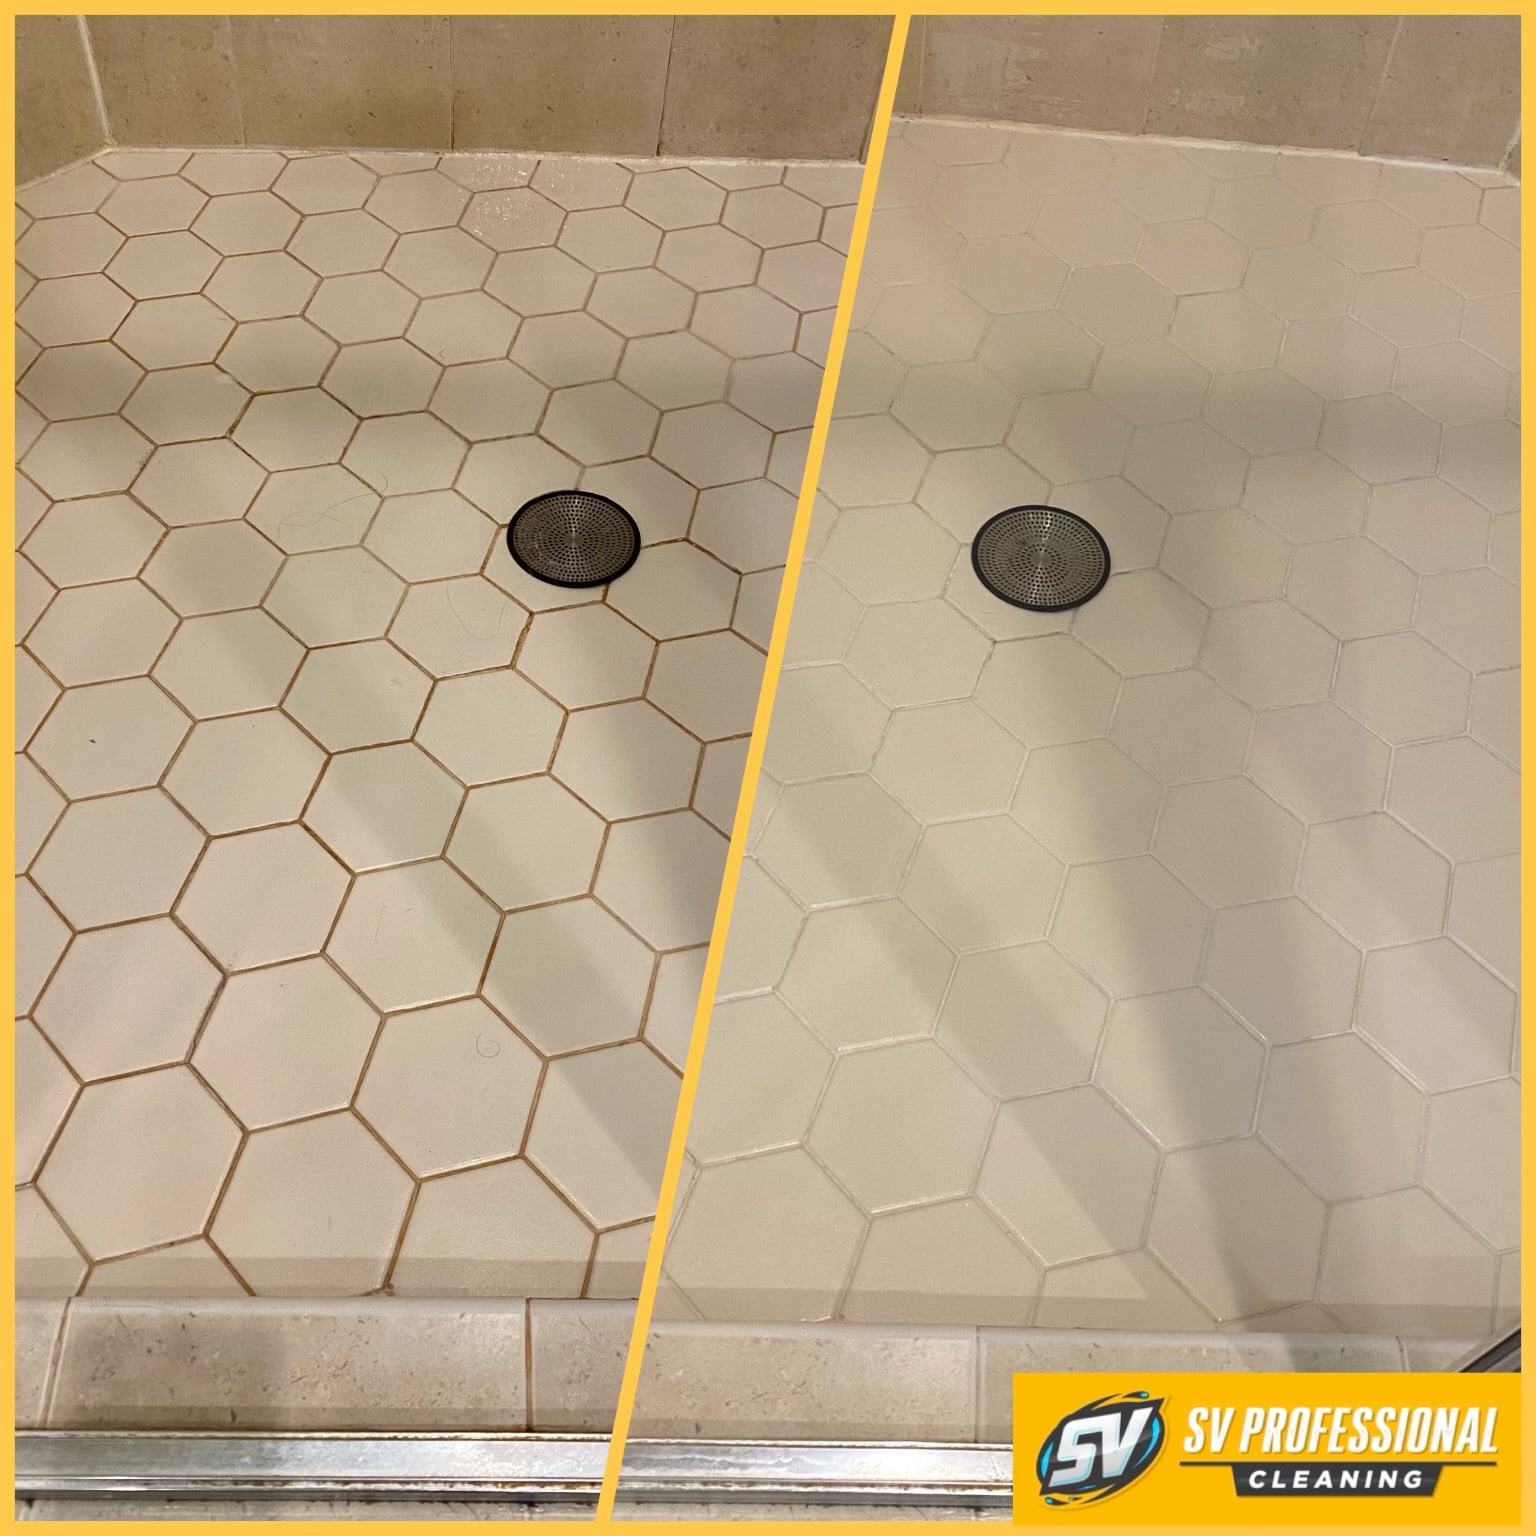 Why Hire a Tile Grout Cleaning Service Provider?